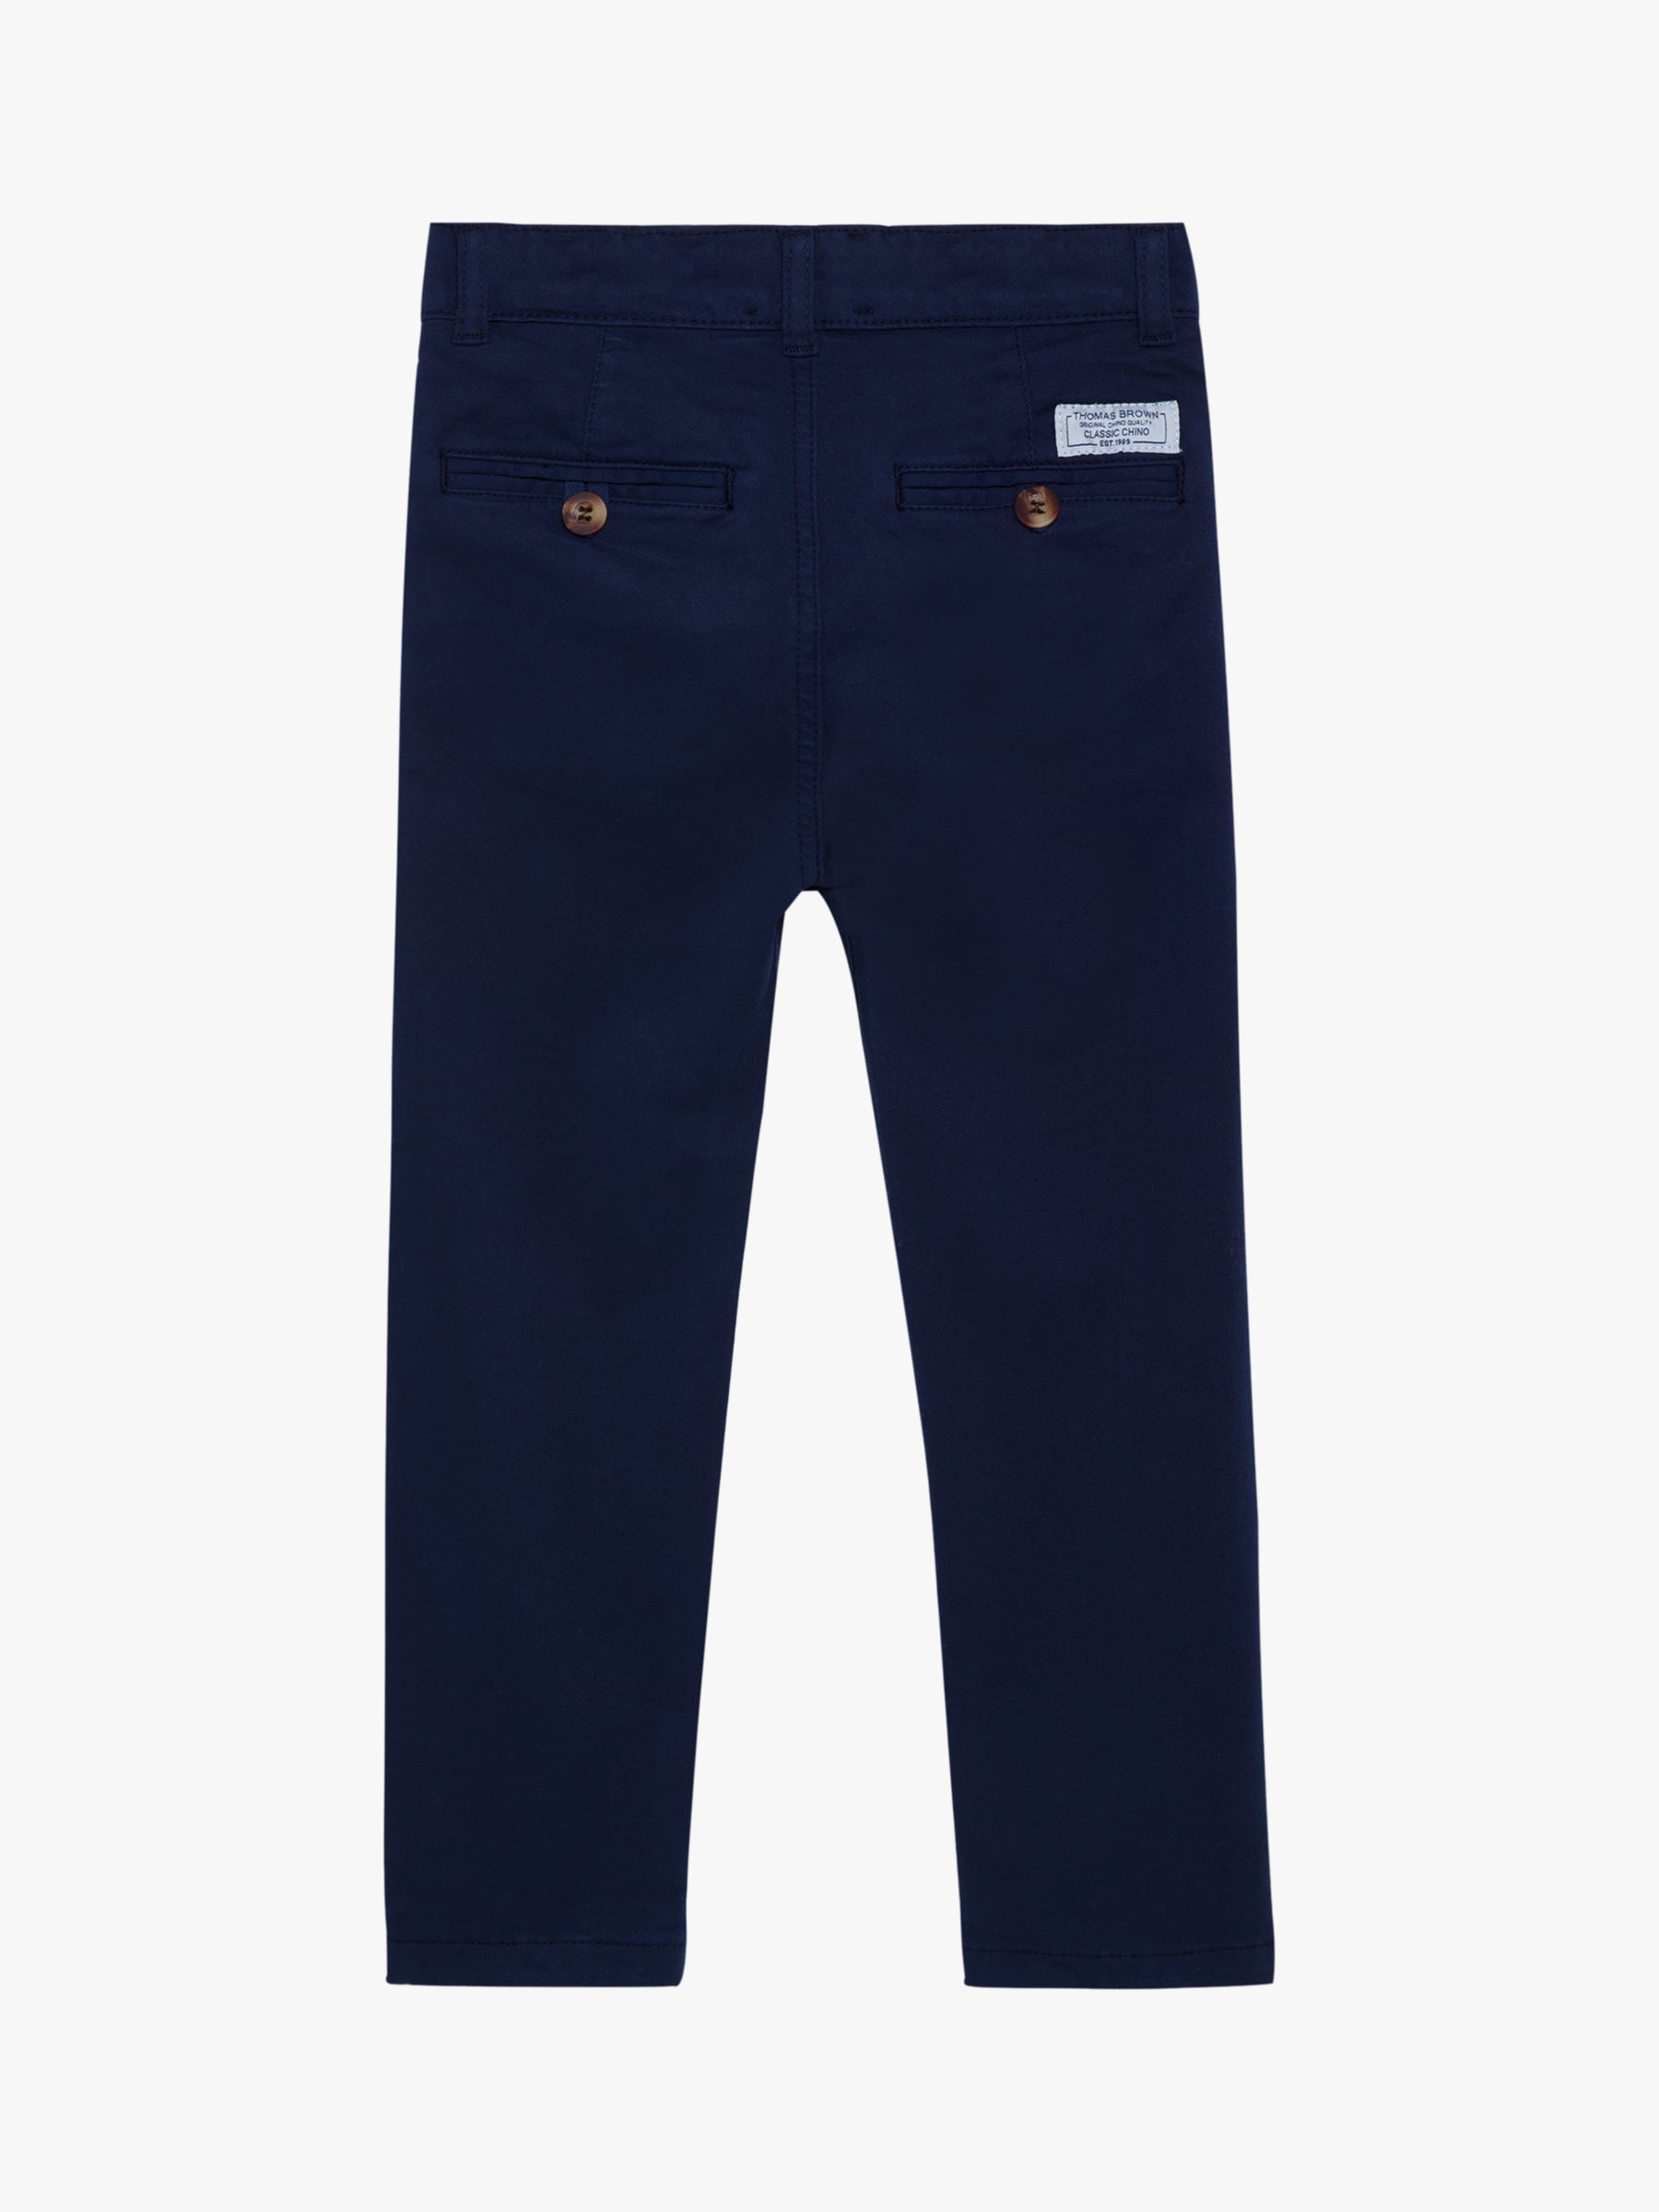 Trotters Kids' Jacob Trousers, Navy, 2 years